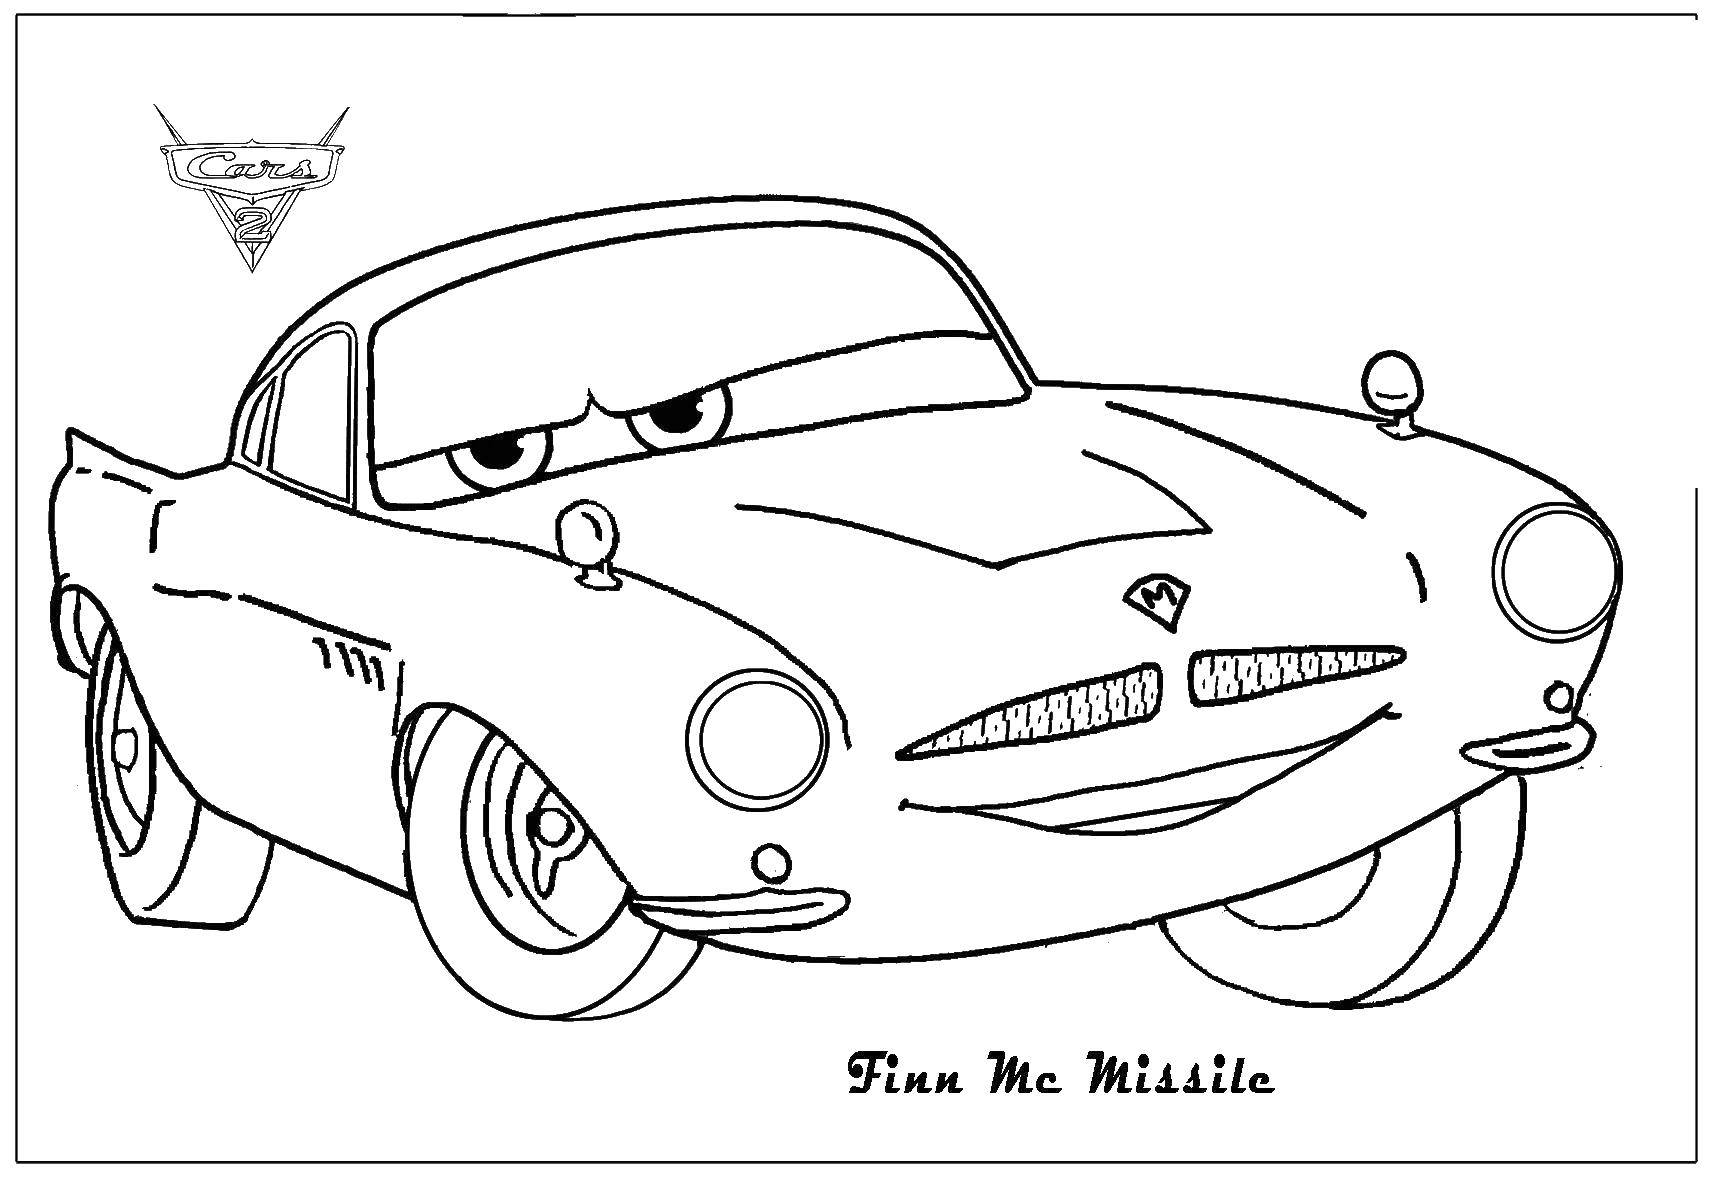 Coloring Finn mcmissile is a British spy. Category Wheelbarrows. Tags:  Finn Mcmissile, cars.